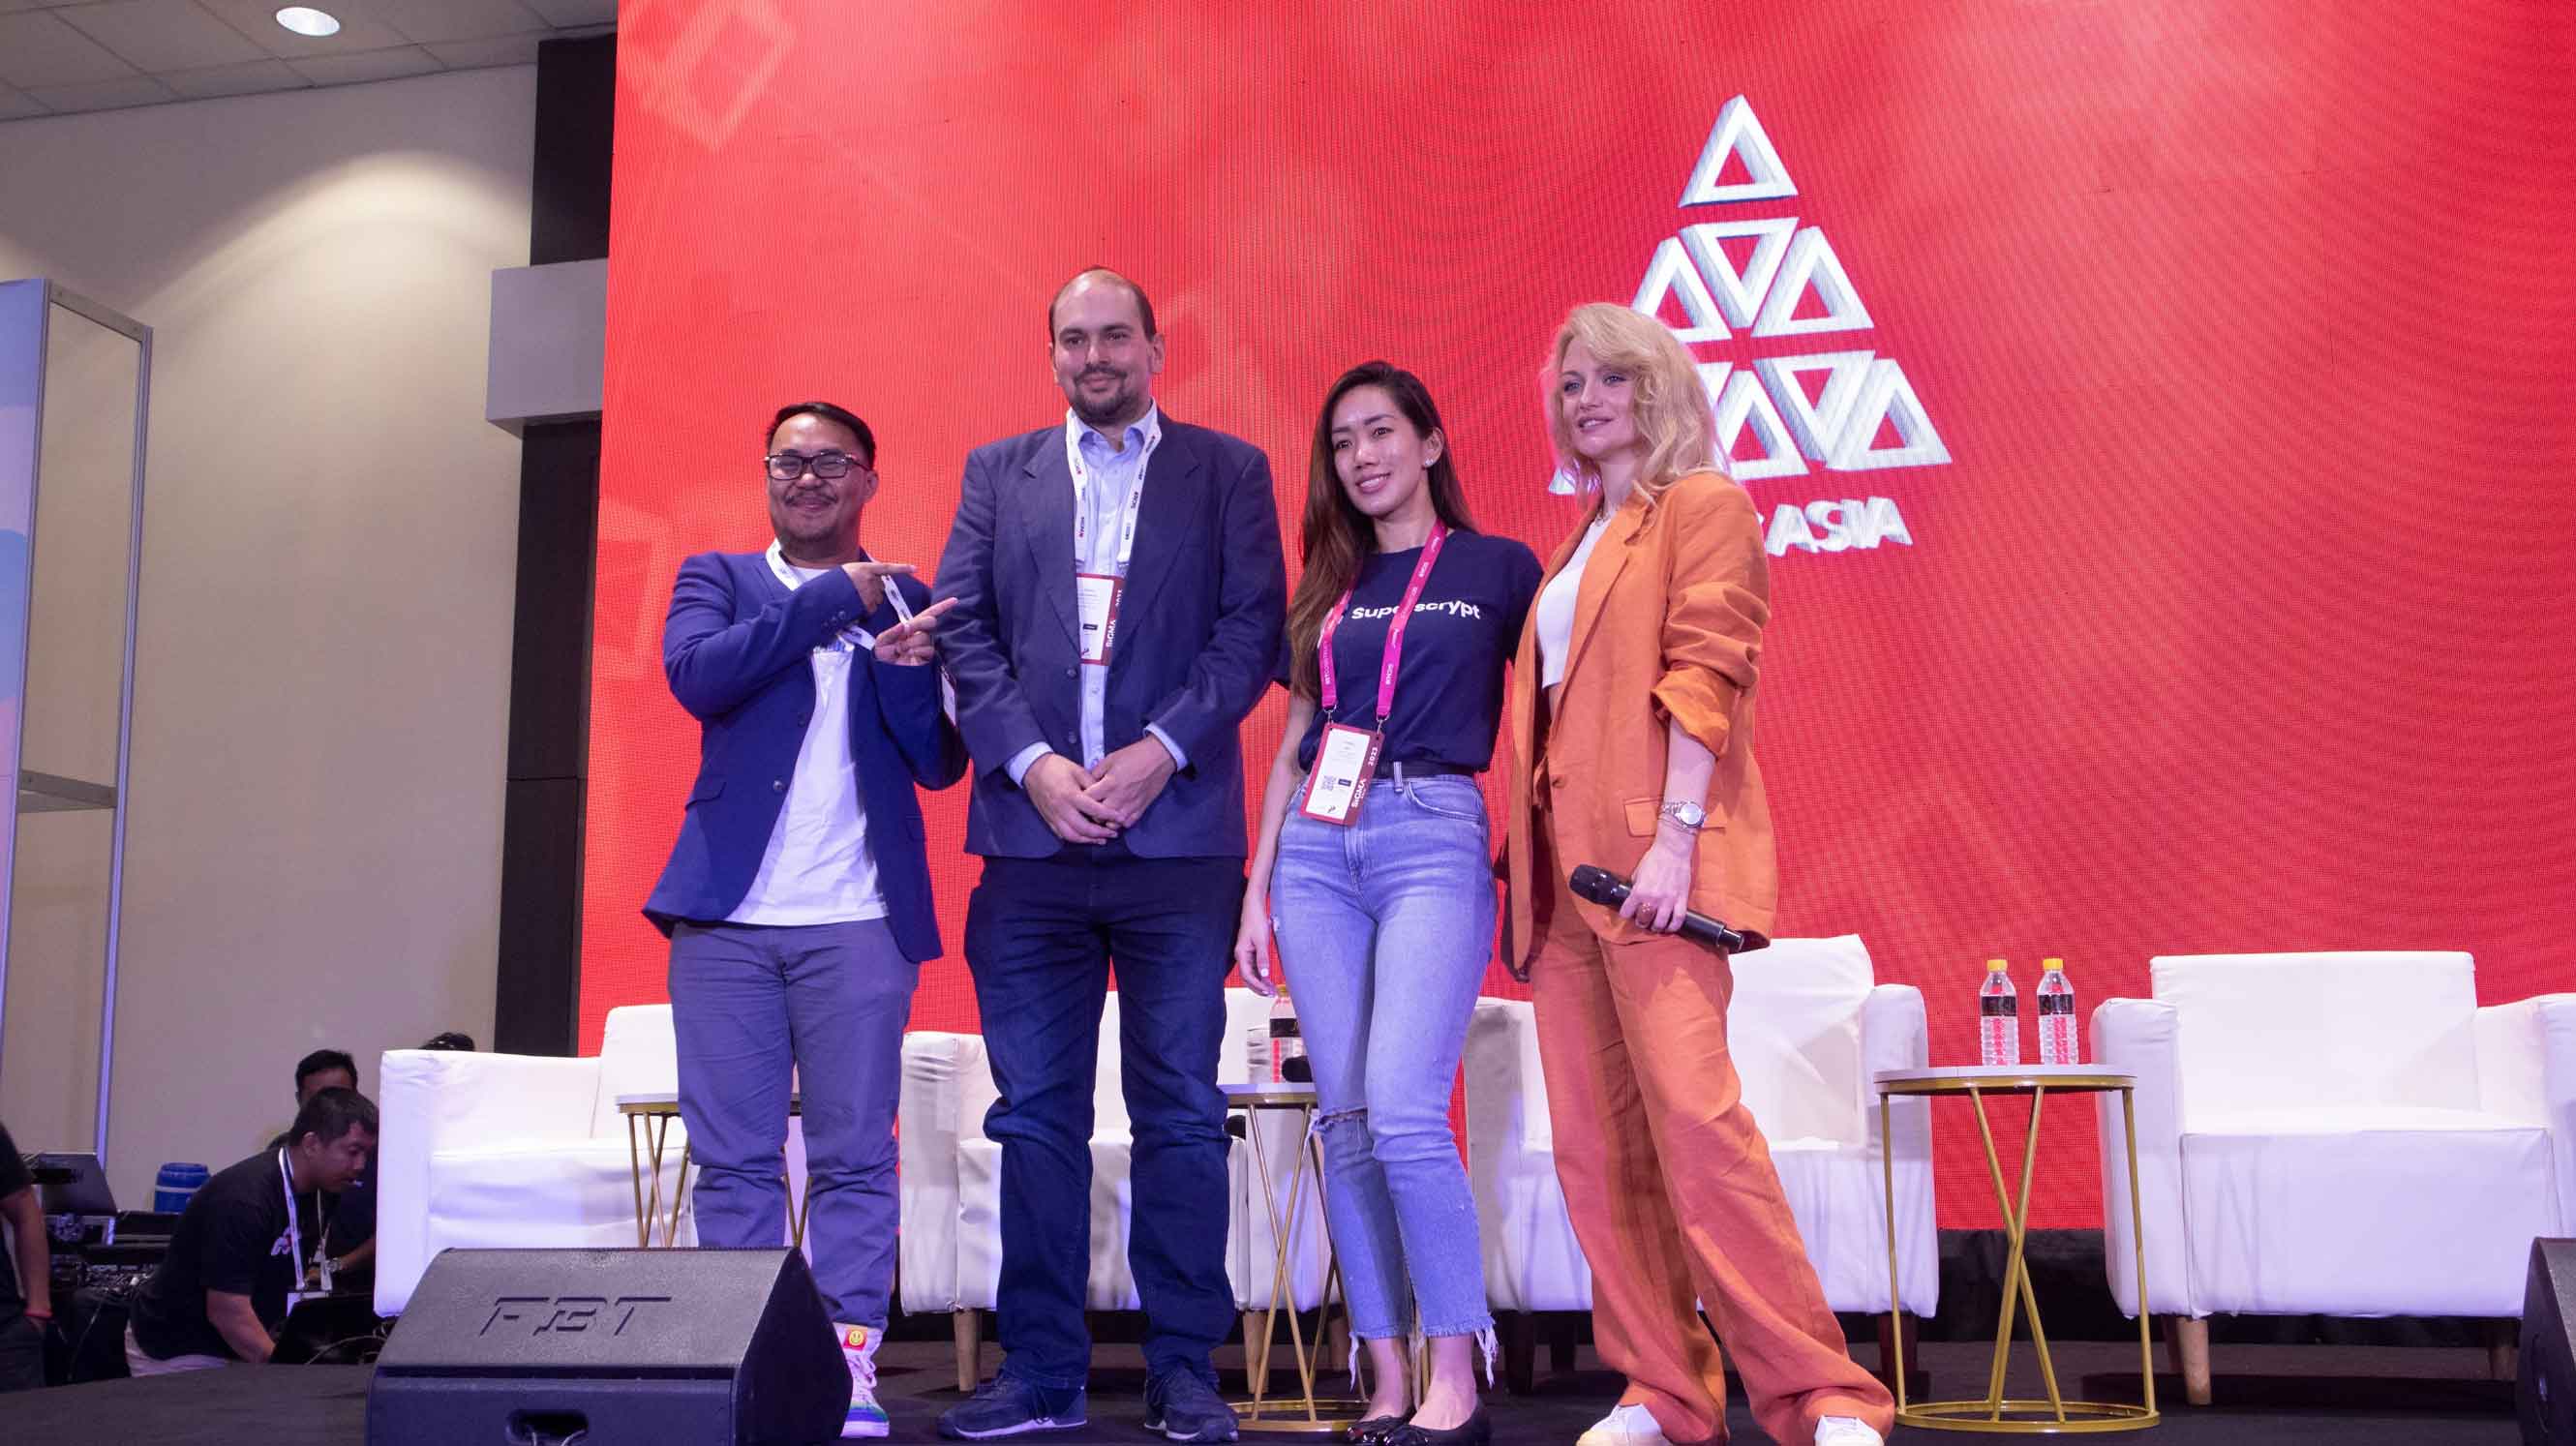 Kenneth James Berry, Frank Schuengel, Yvonne Ang, and Olga Yaroshevsky at the AIBC Asia Summit on stage